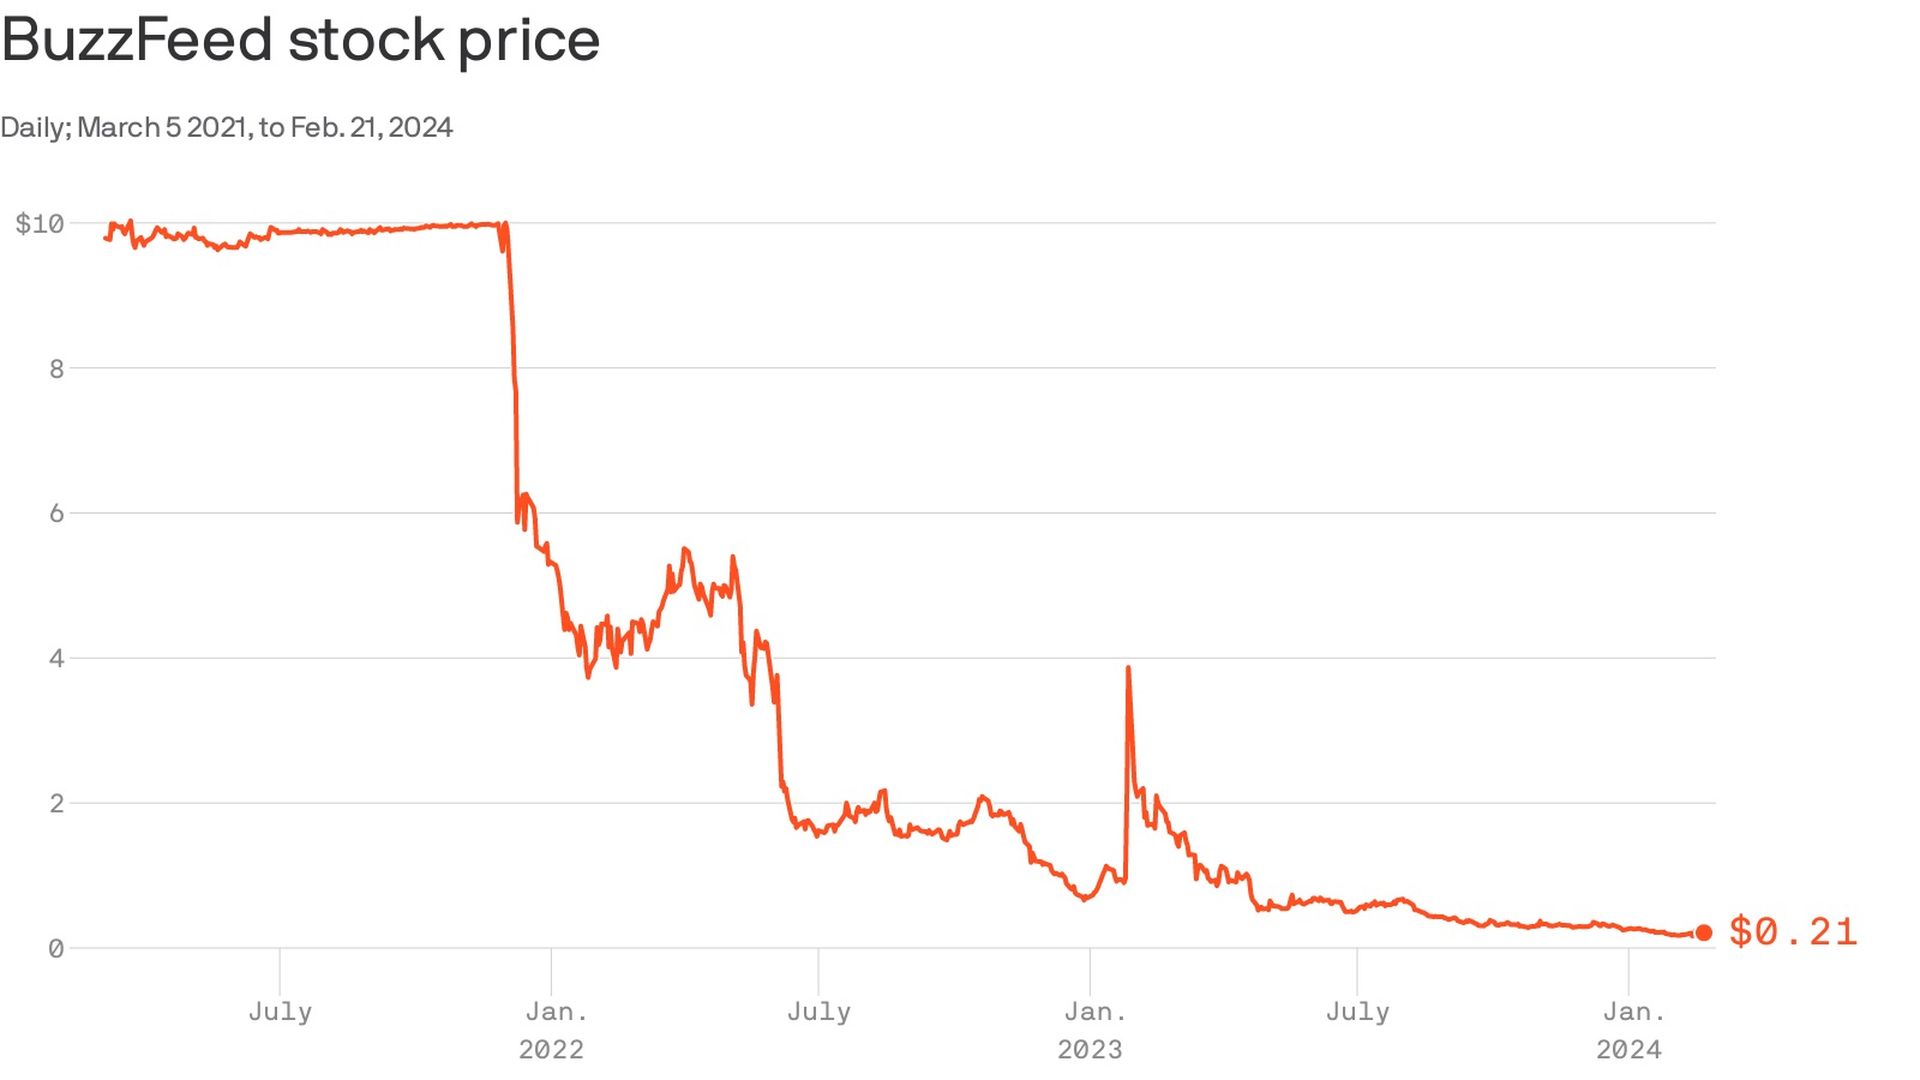 Line chart showing a significant decline in BuzzFeed's stock price from $9.79 in March 2021 to $0.21 in February 2024.